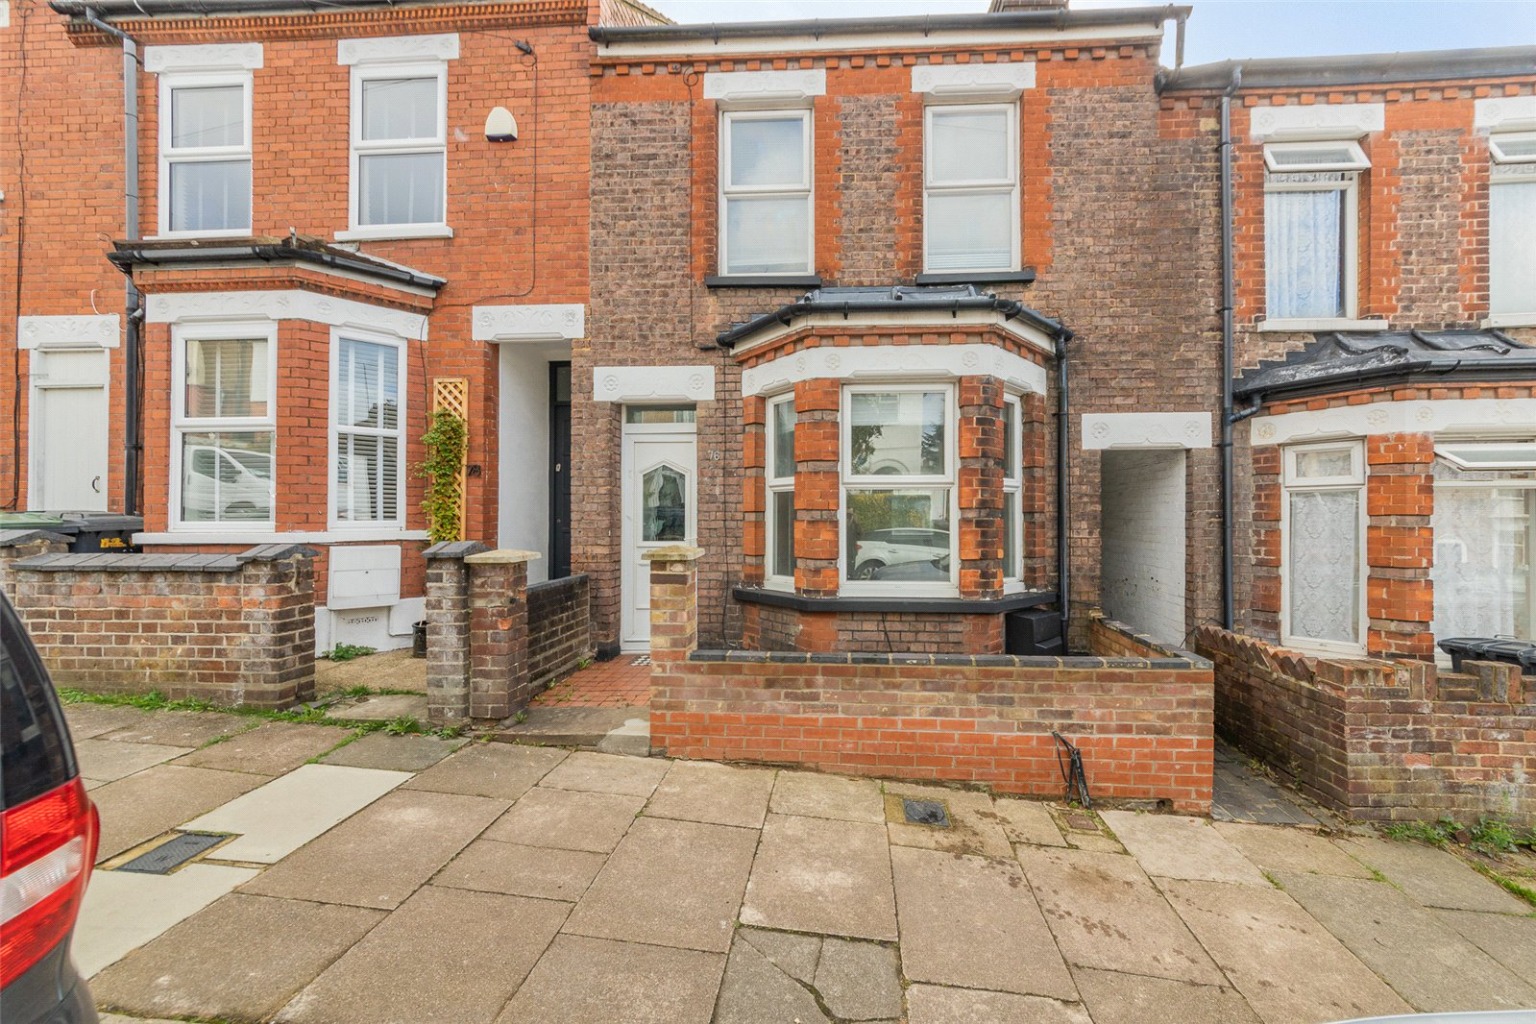 3 bed terraced house for sale in Talbot Road, Luton, LU2 